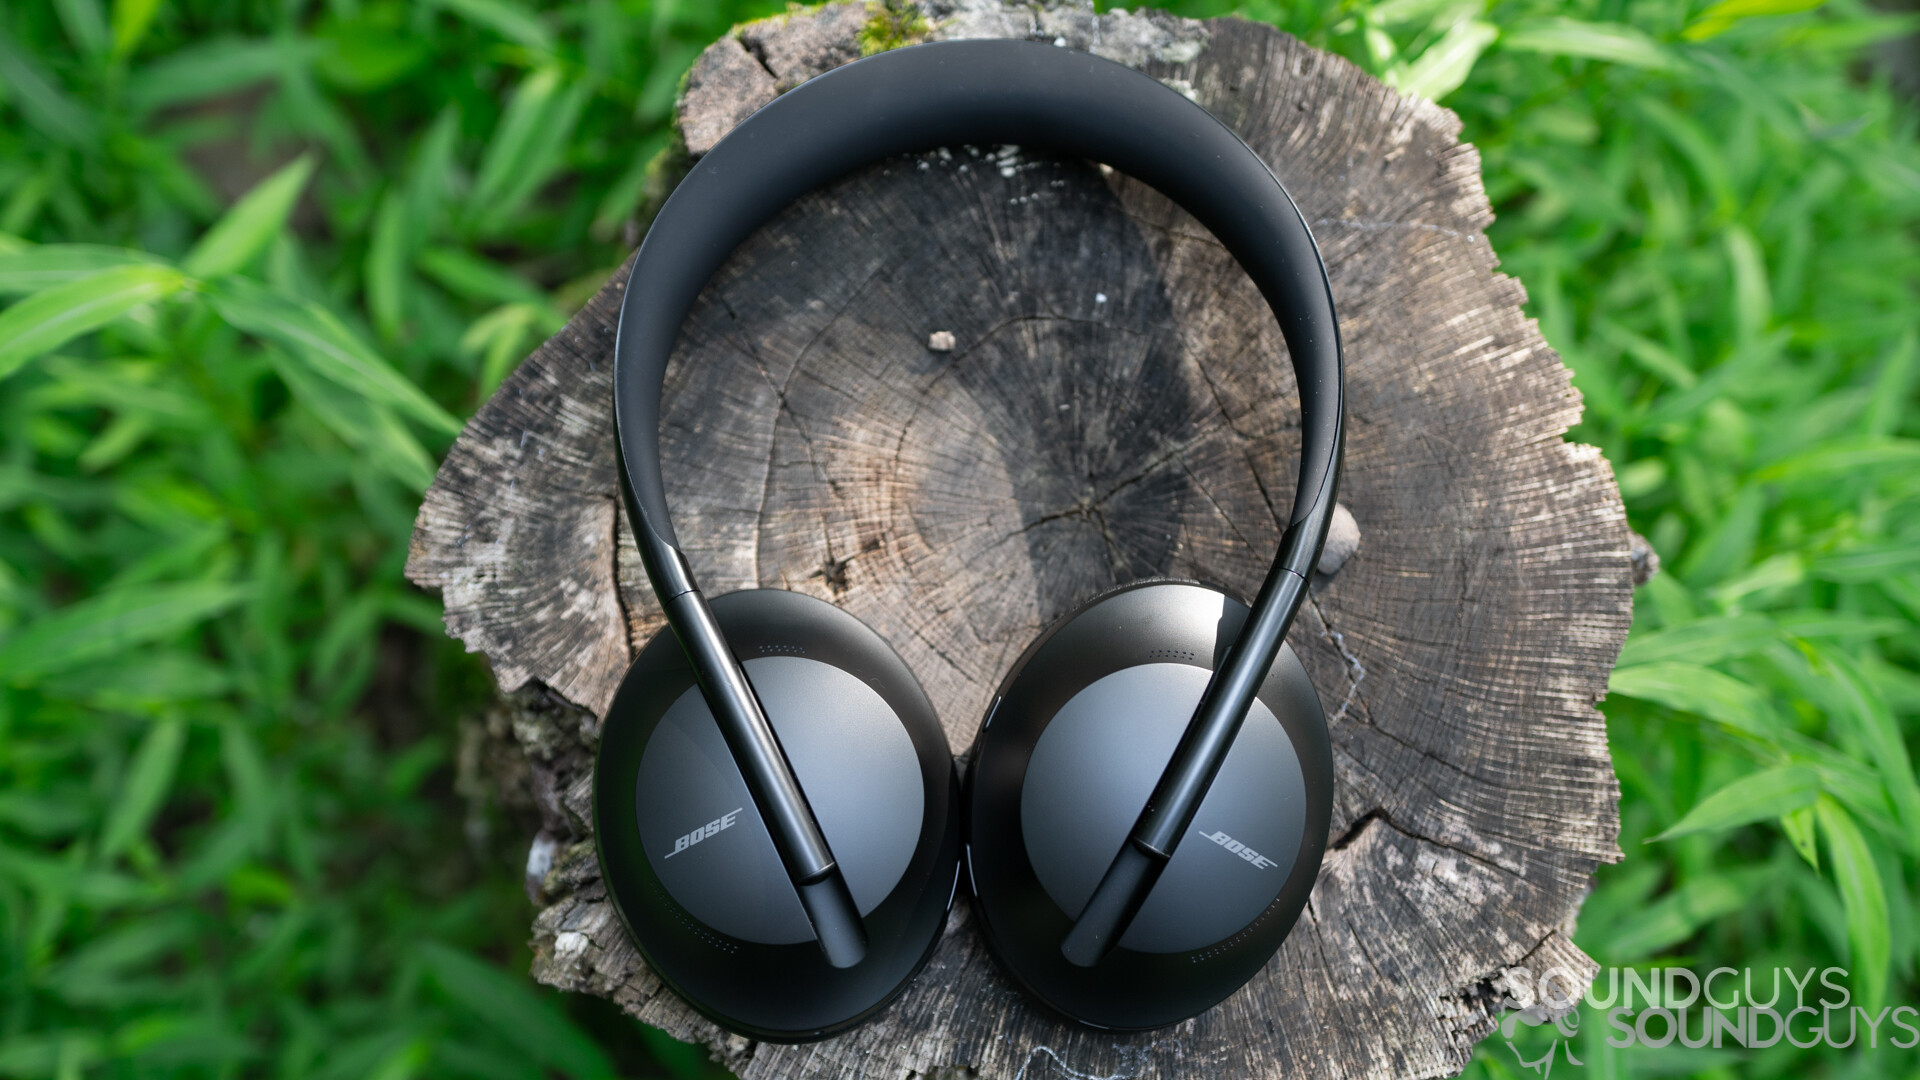 Bose Noise Canceling Headphones 700 sitting on a tree stump surrounded by grass outside.